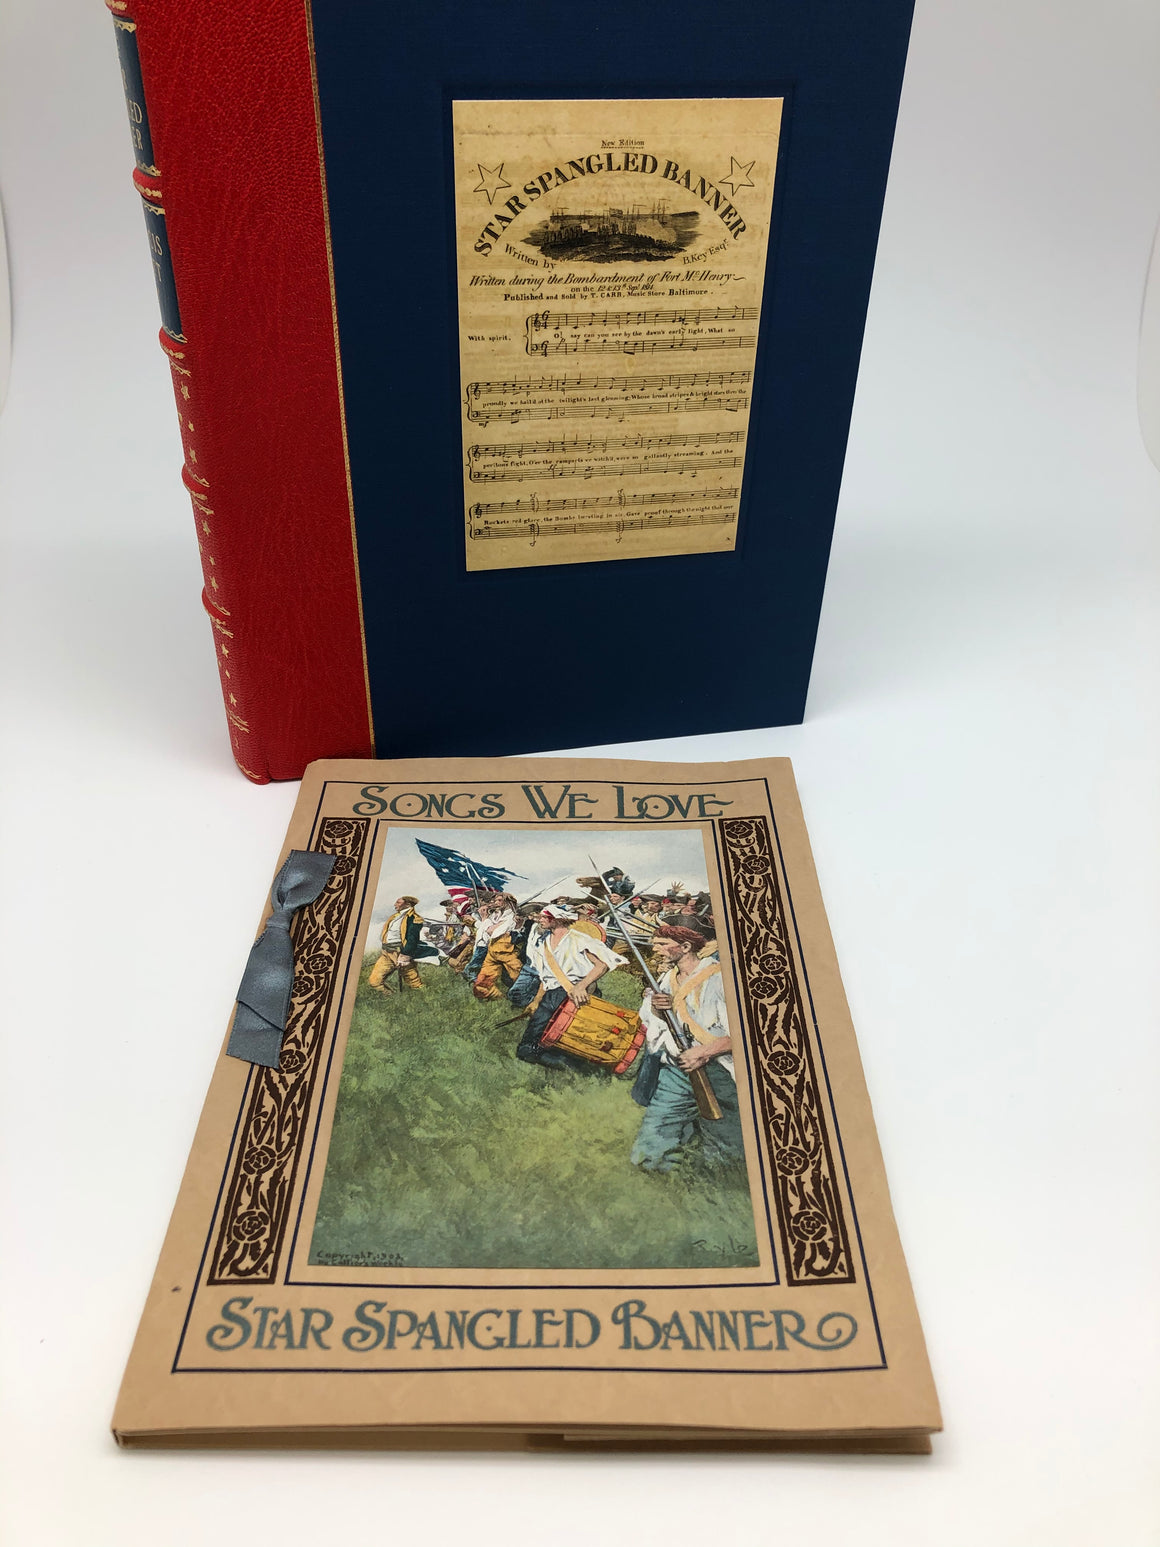 Songs We Love: The Star Spangled Banner by Howard Pyle, Presumed First Edition, 1912